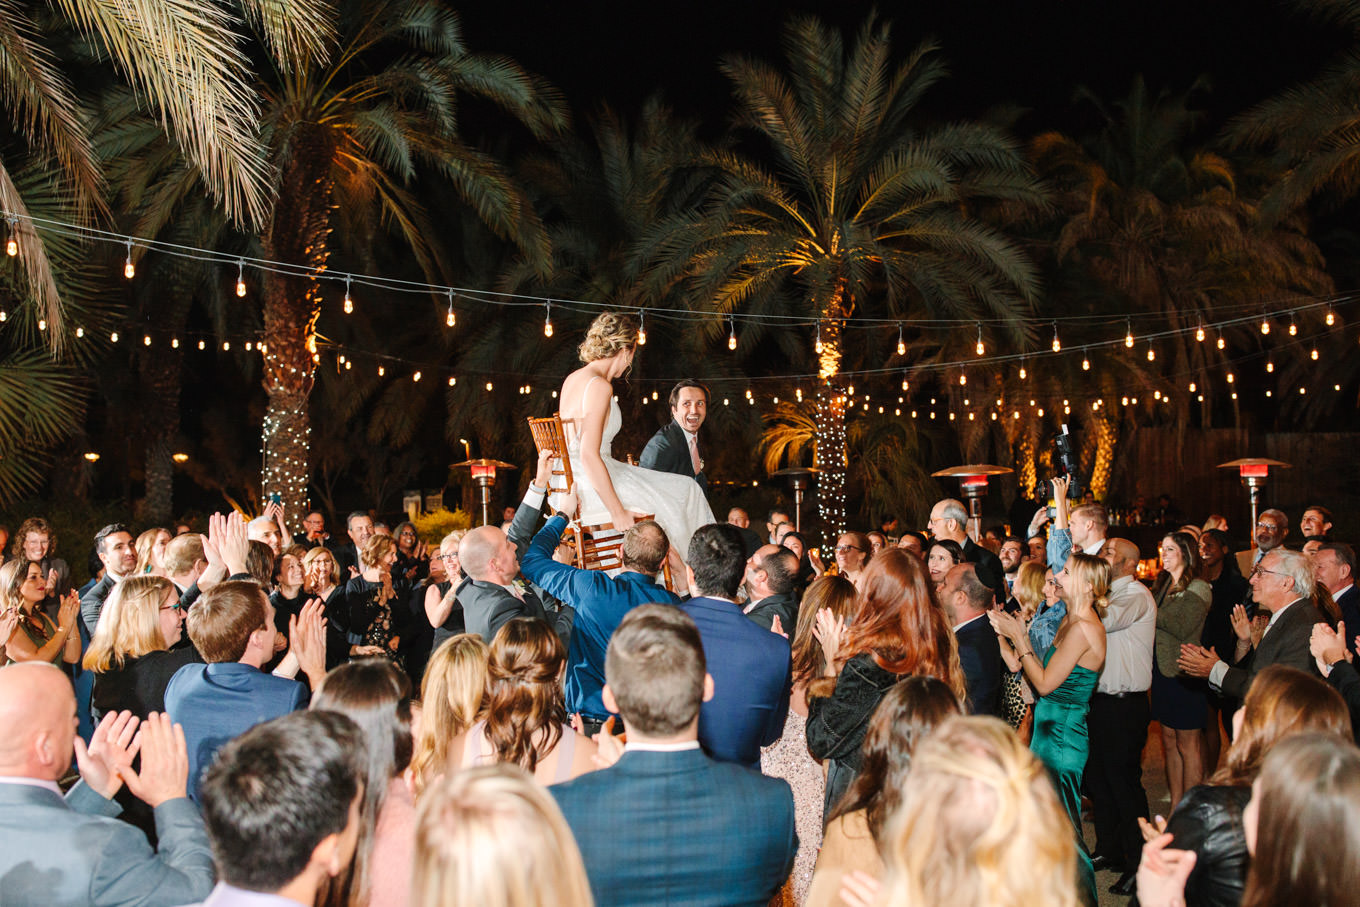 Wedding reception during Horah | Living Desert Zoo & Gardens wedding with unique details | Elevated and colorful wedding photography for fun-loving couples in Southern California |  #PalmSprings #palmspringsphotographer #gardenwedding #palmspringswedding  Source: Mary Costa Photography | Los Angeles wedding photographer 